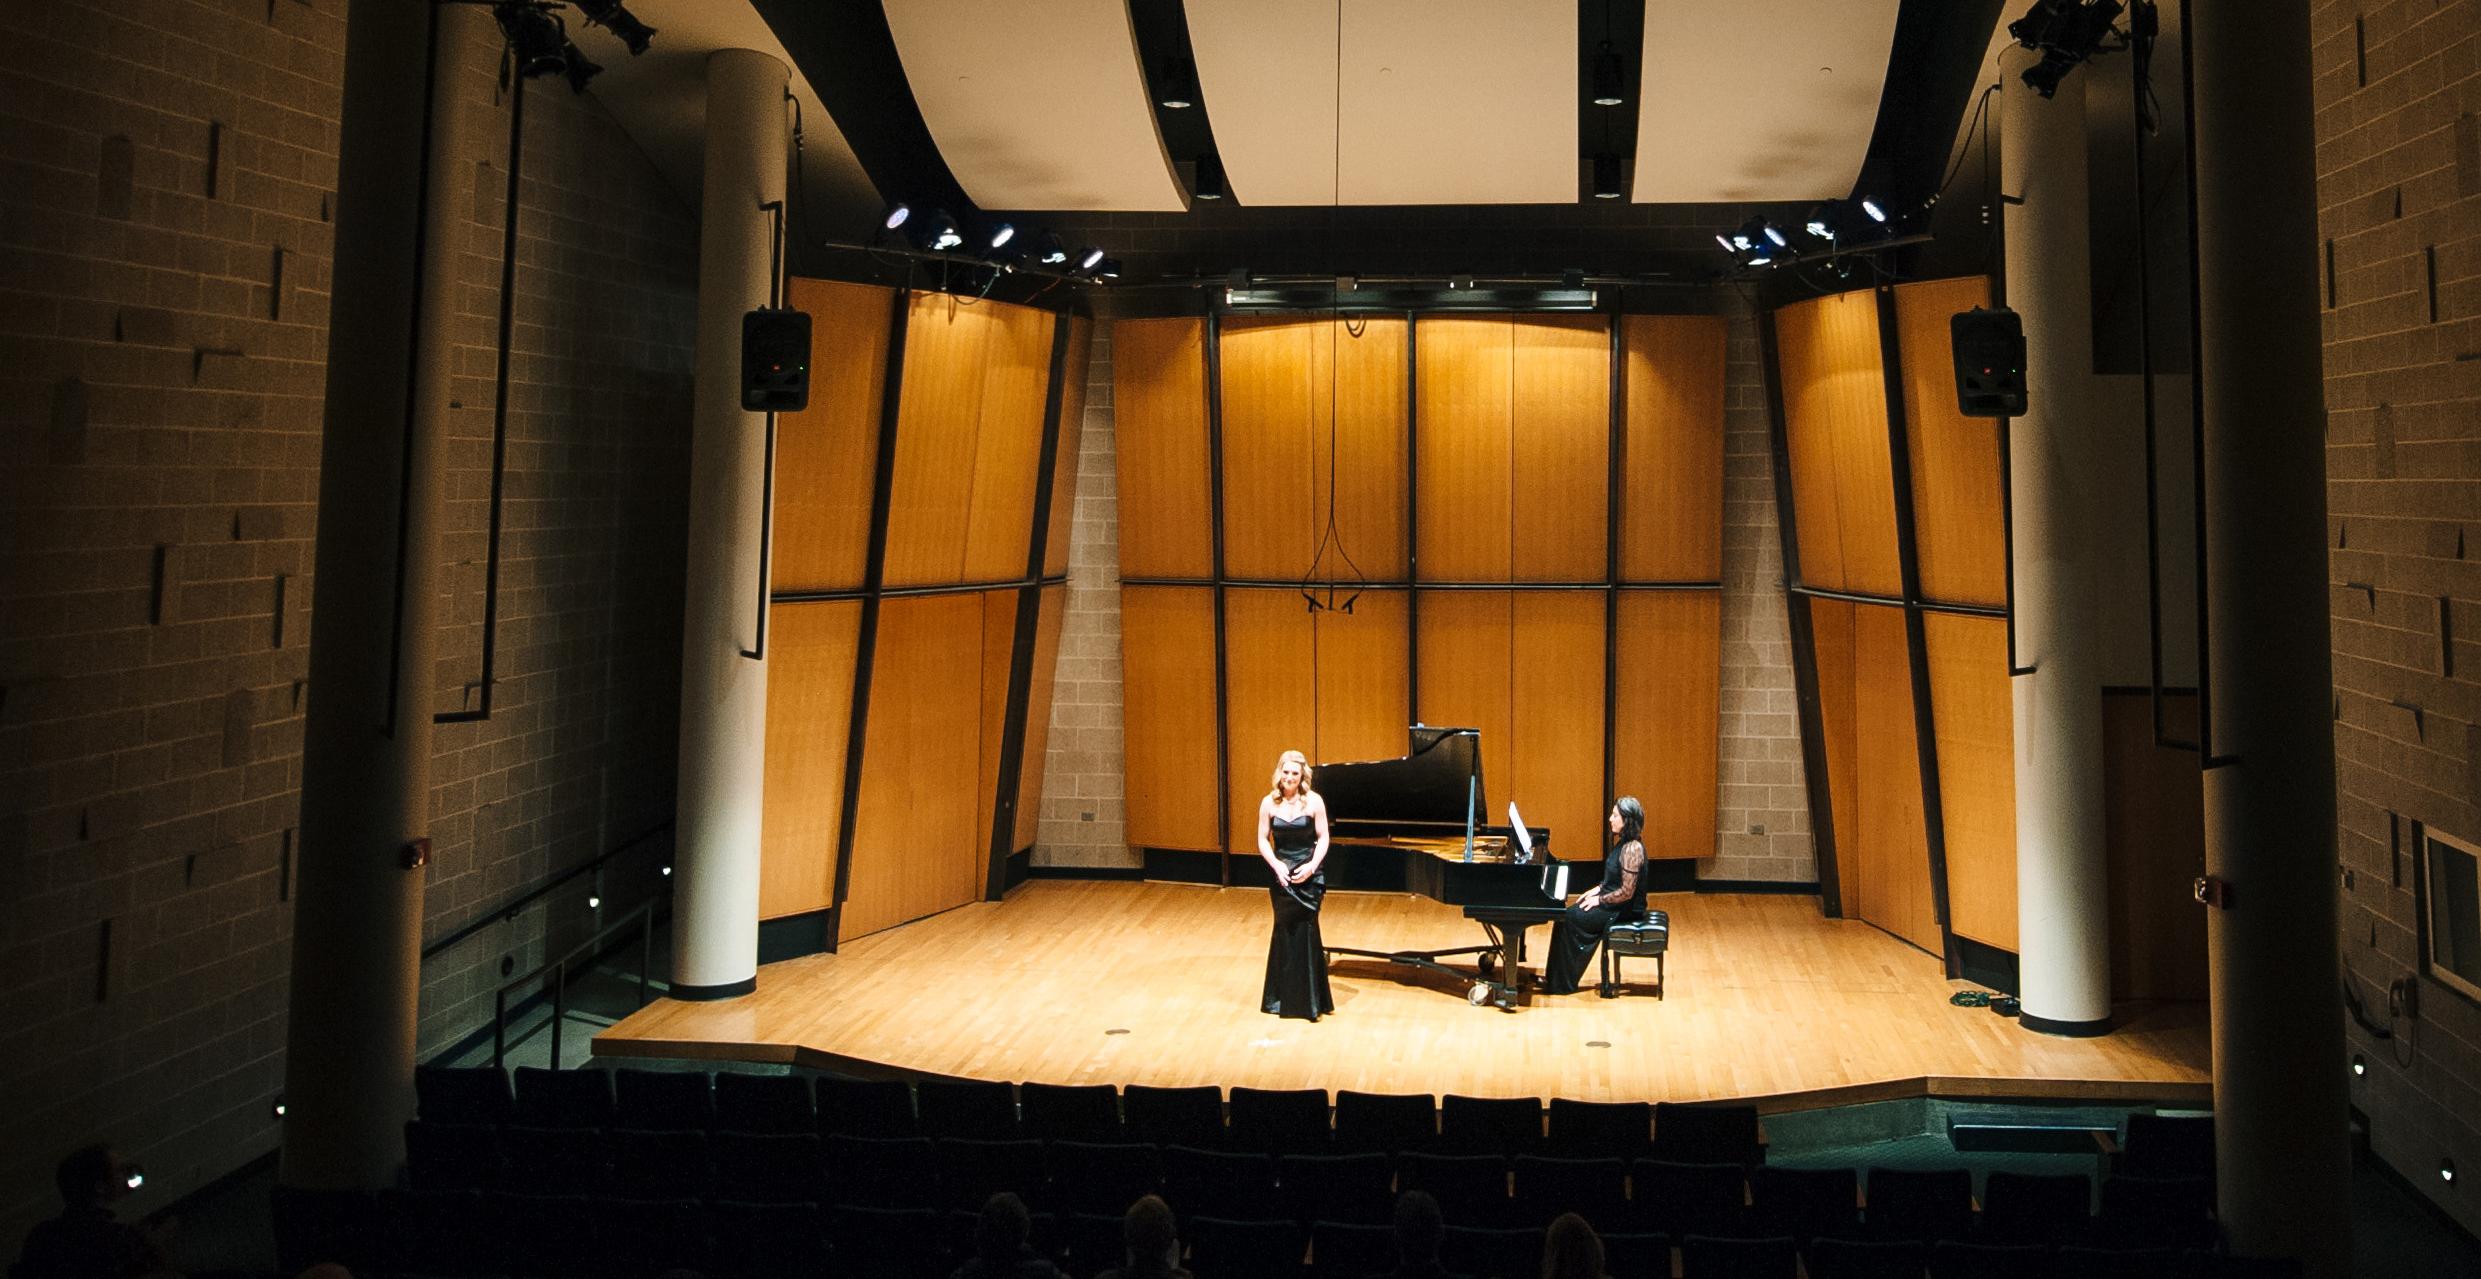 Singer and pianist performing in recital hall